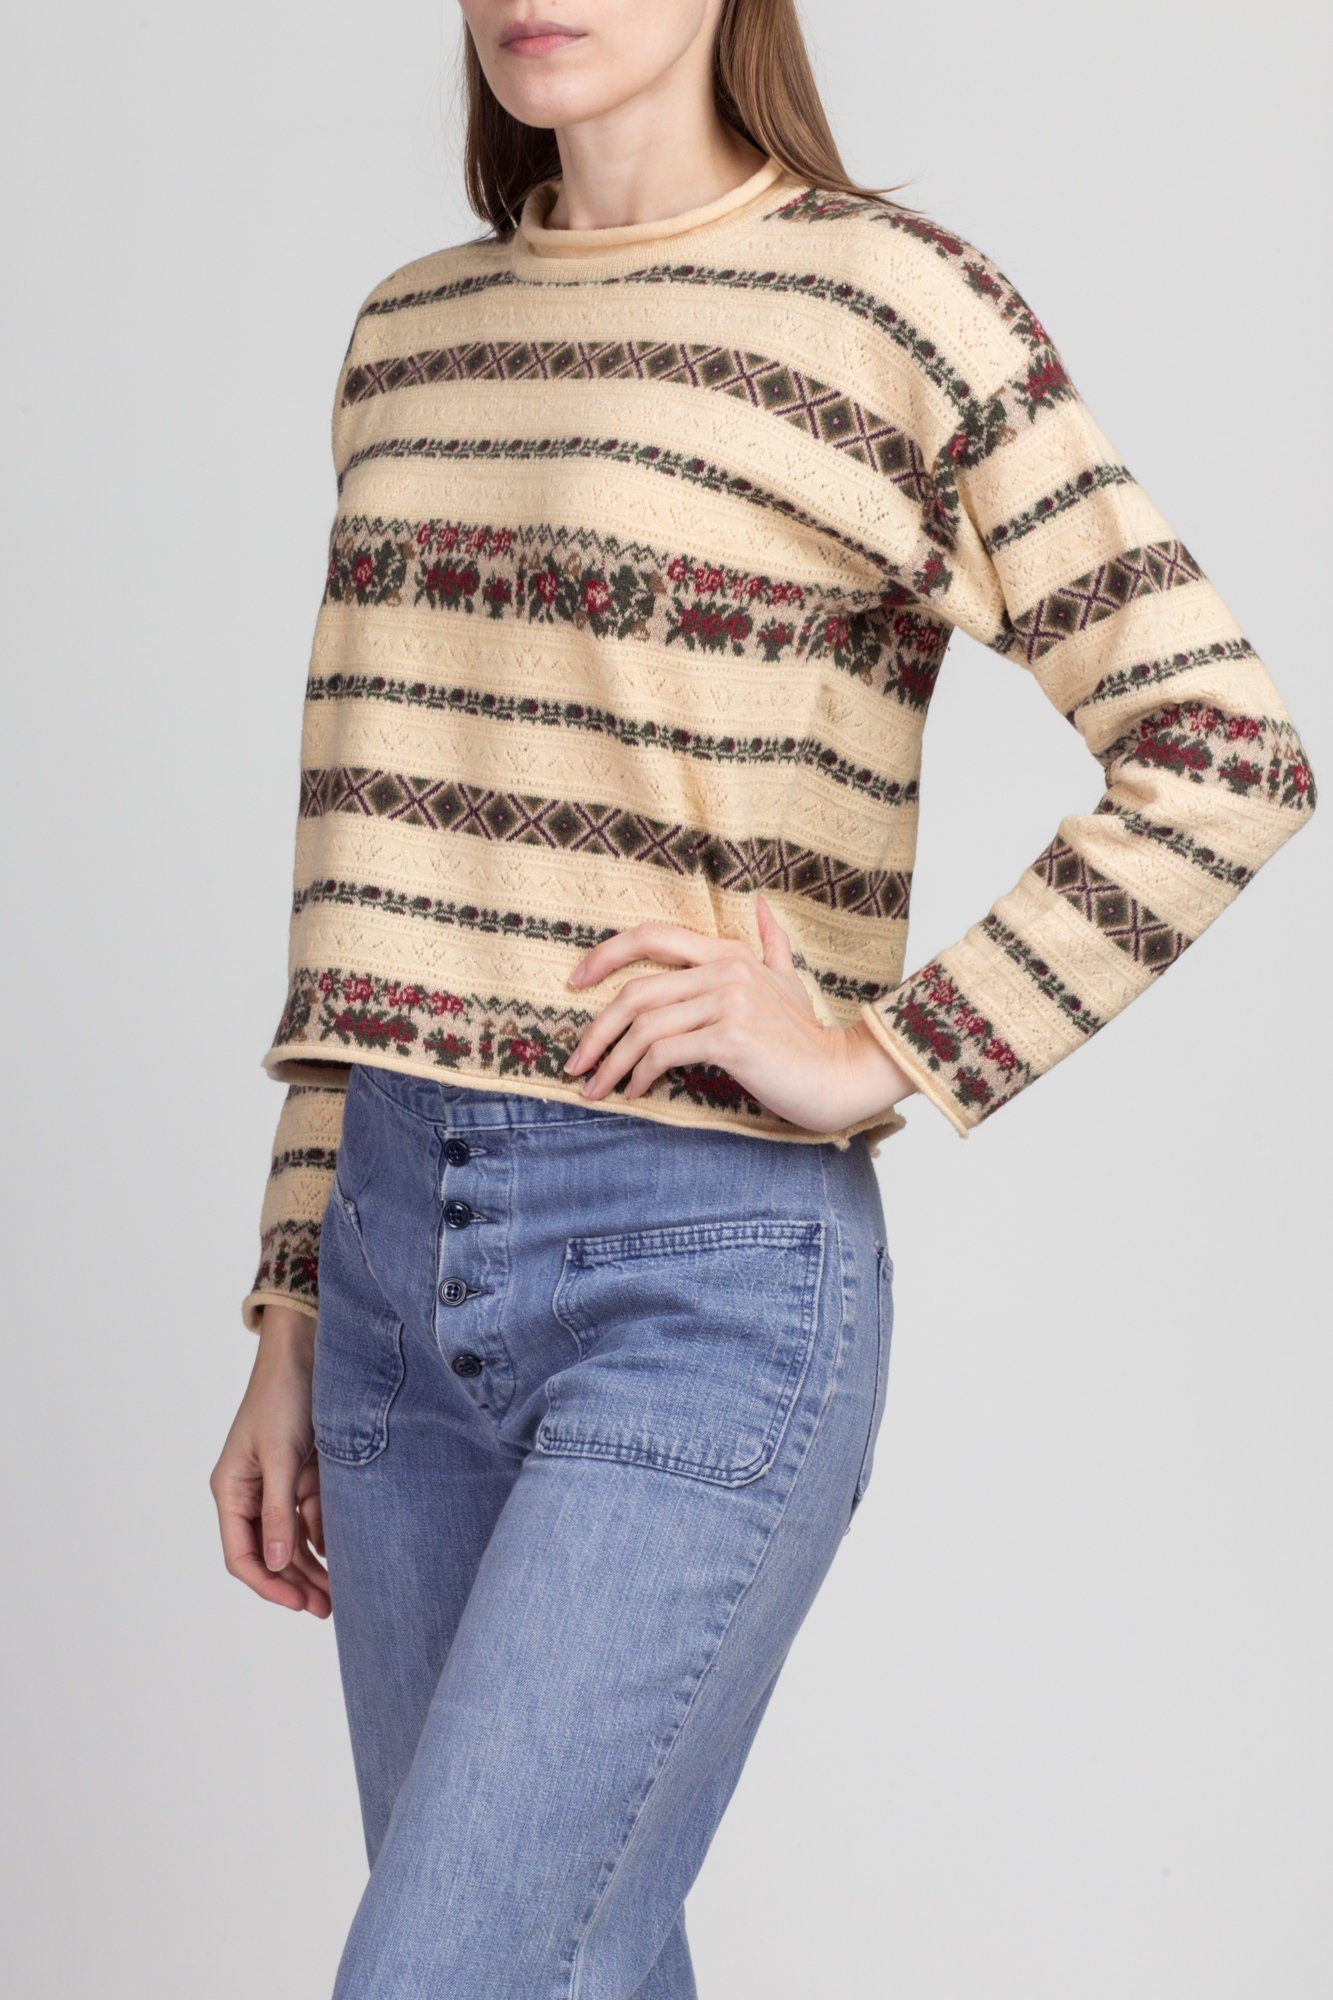 90s Ann Taylor Floral Wool Knit Sweater - Small 